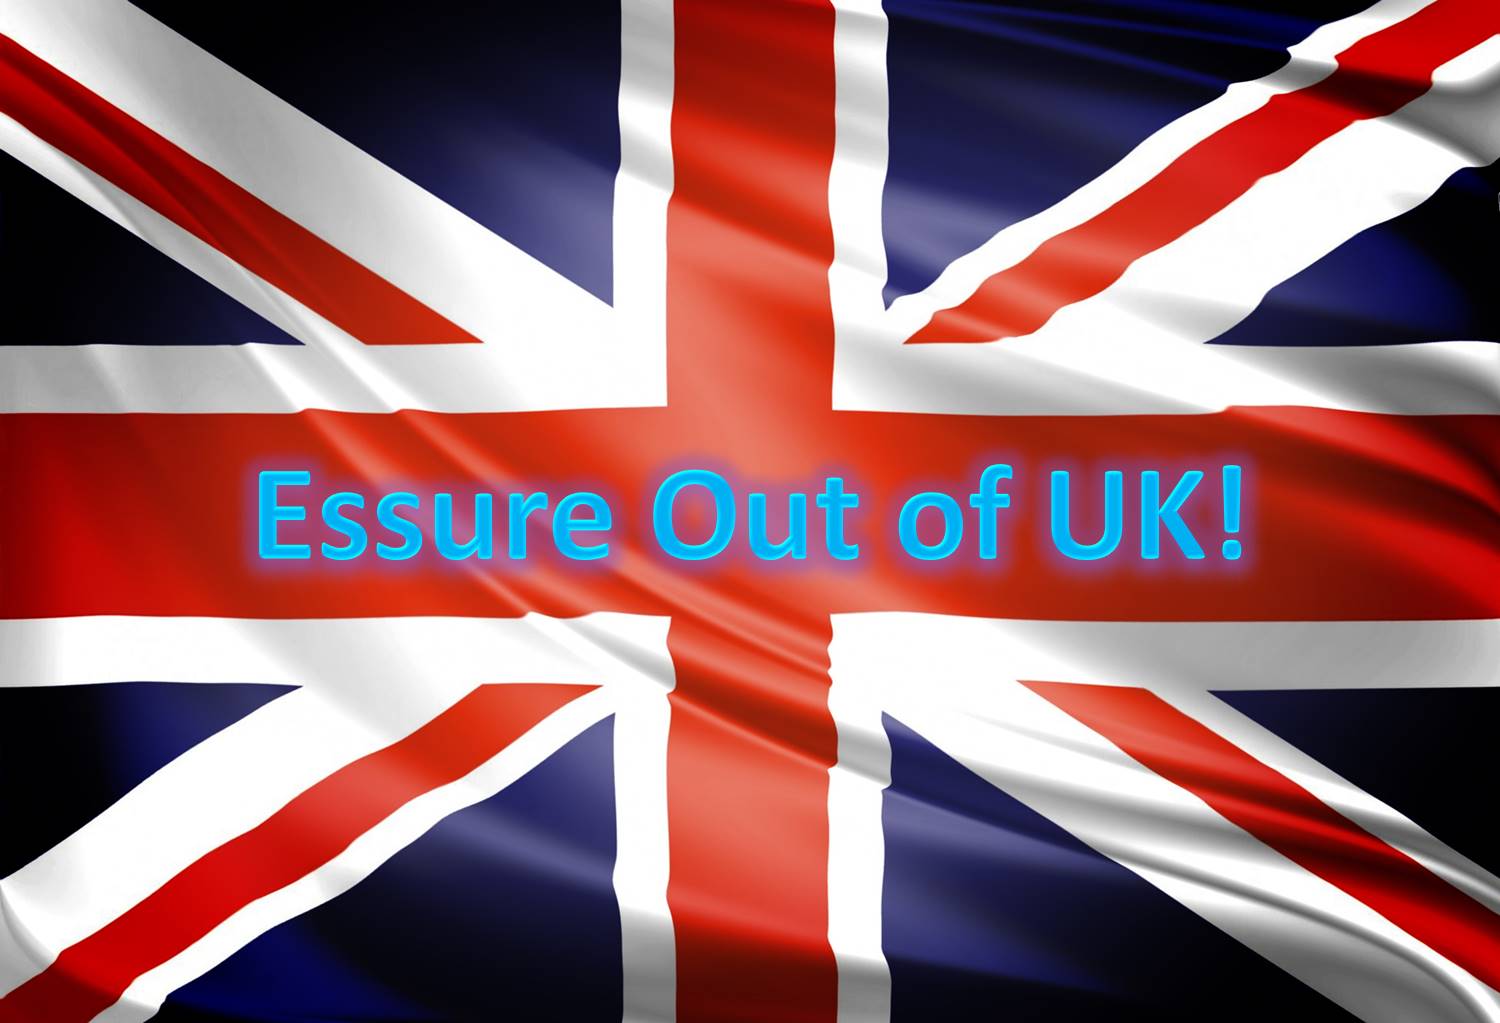 Essure out of UK! Flag image courtesy of www.silicon.co.uk.